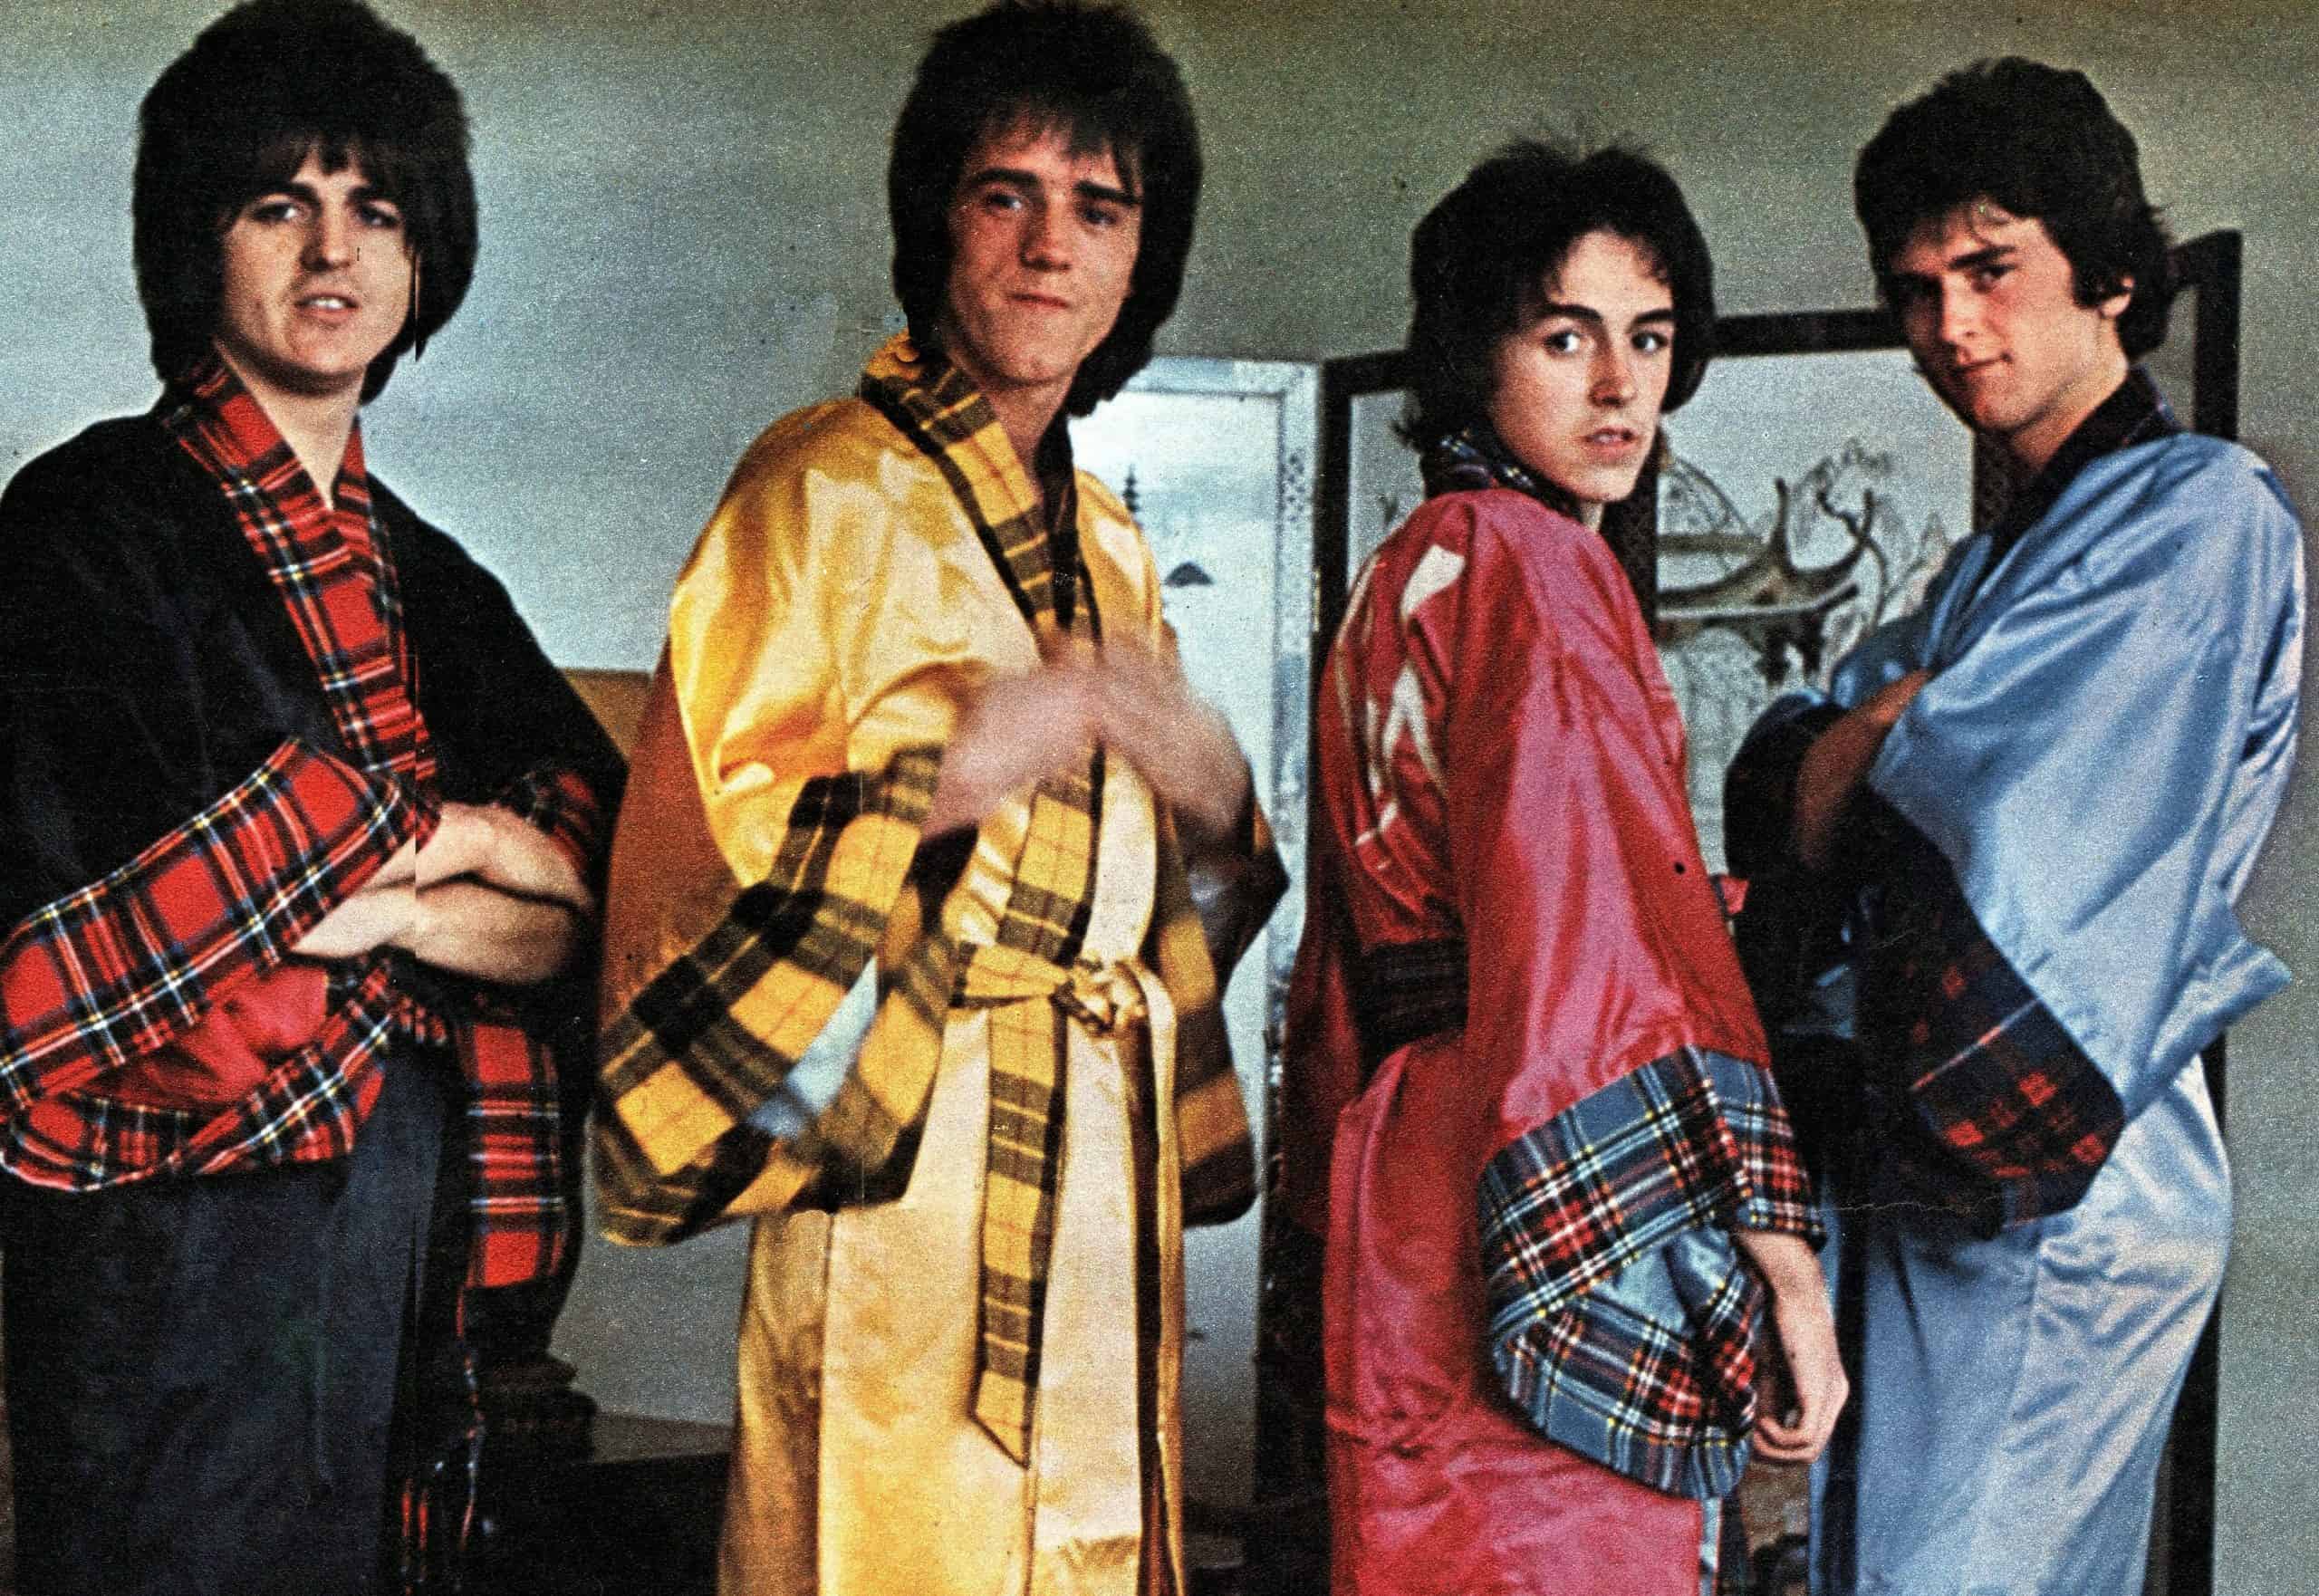 What are The Bay City Rollers now